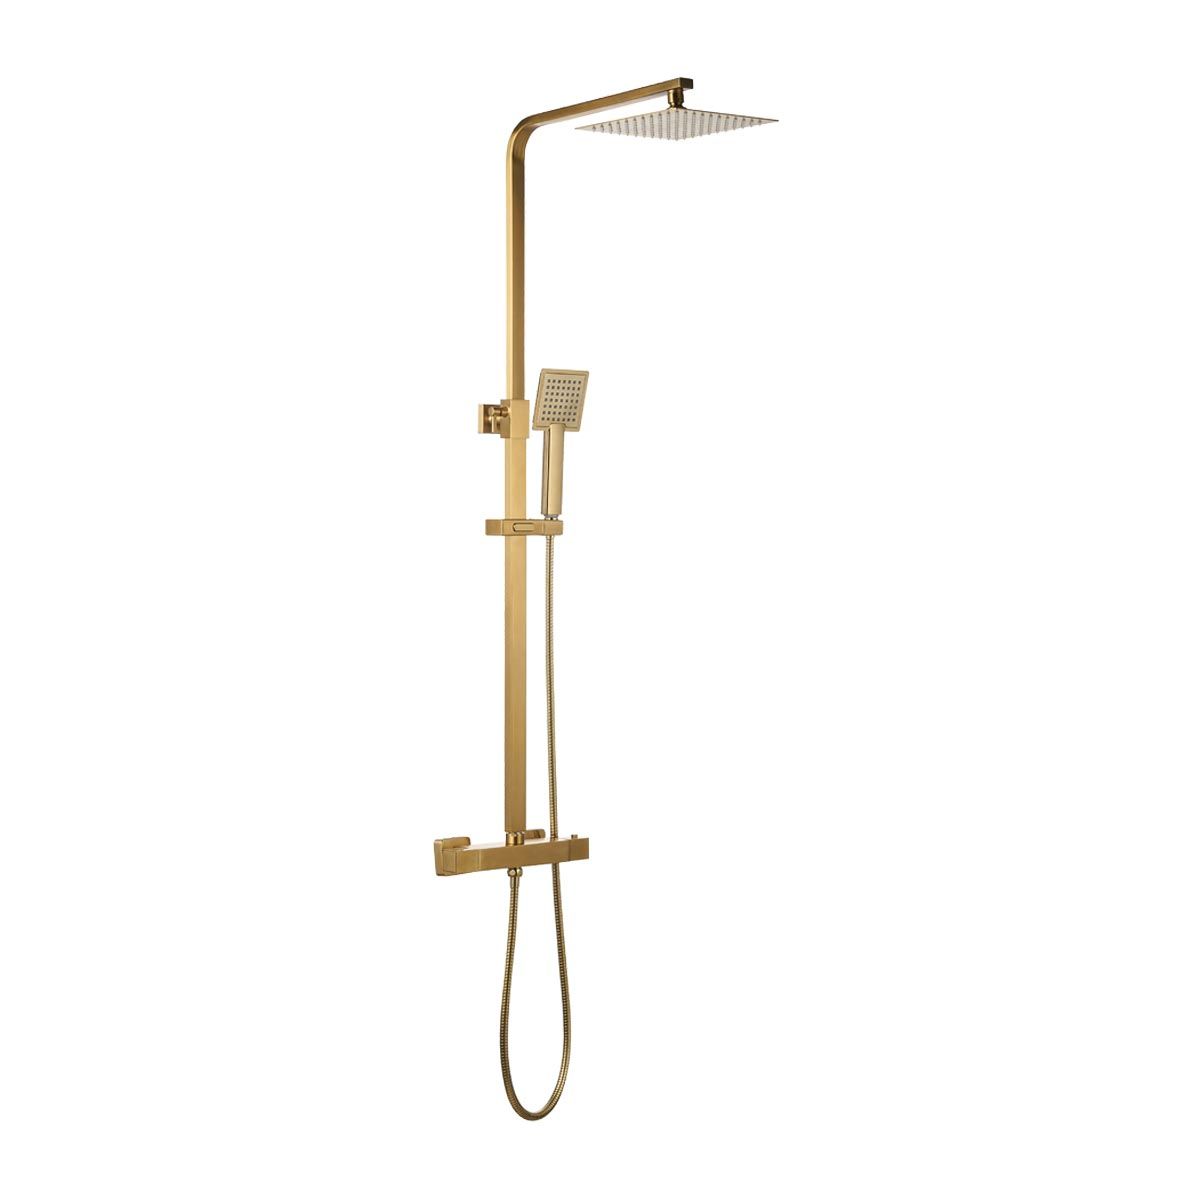 niagara observa brushed brass square thermostatic shower set